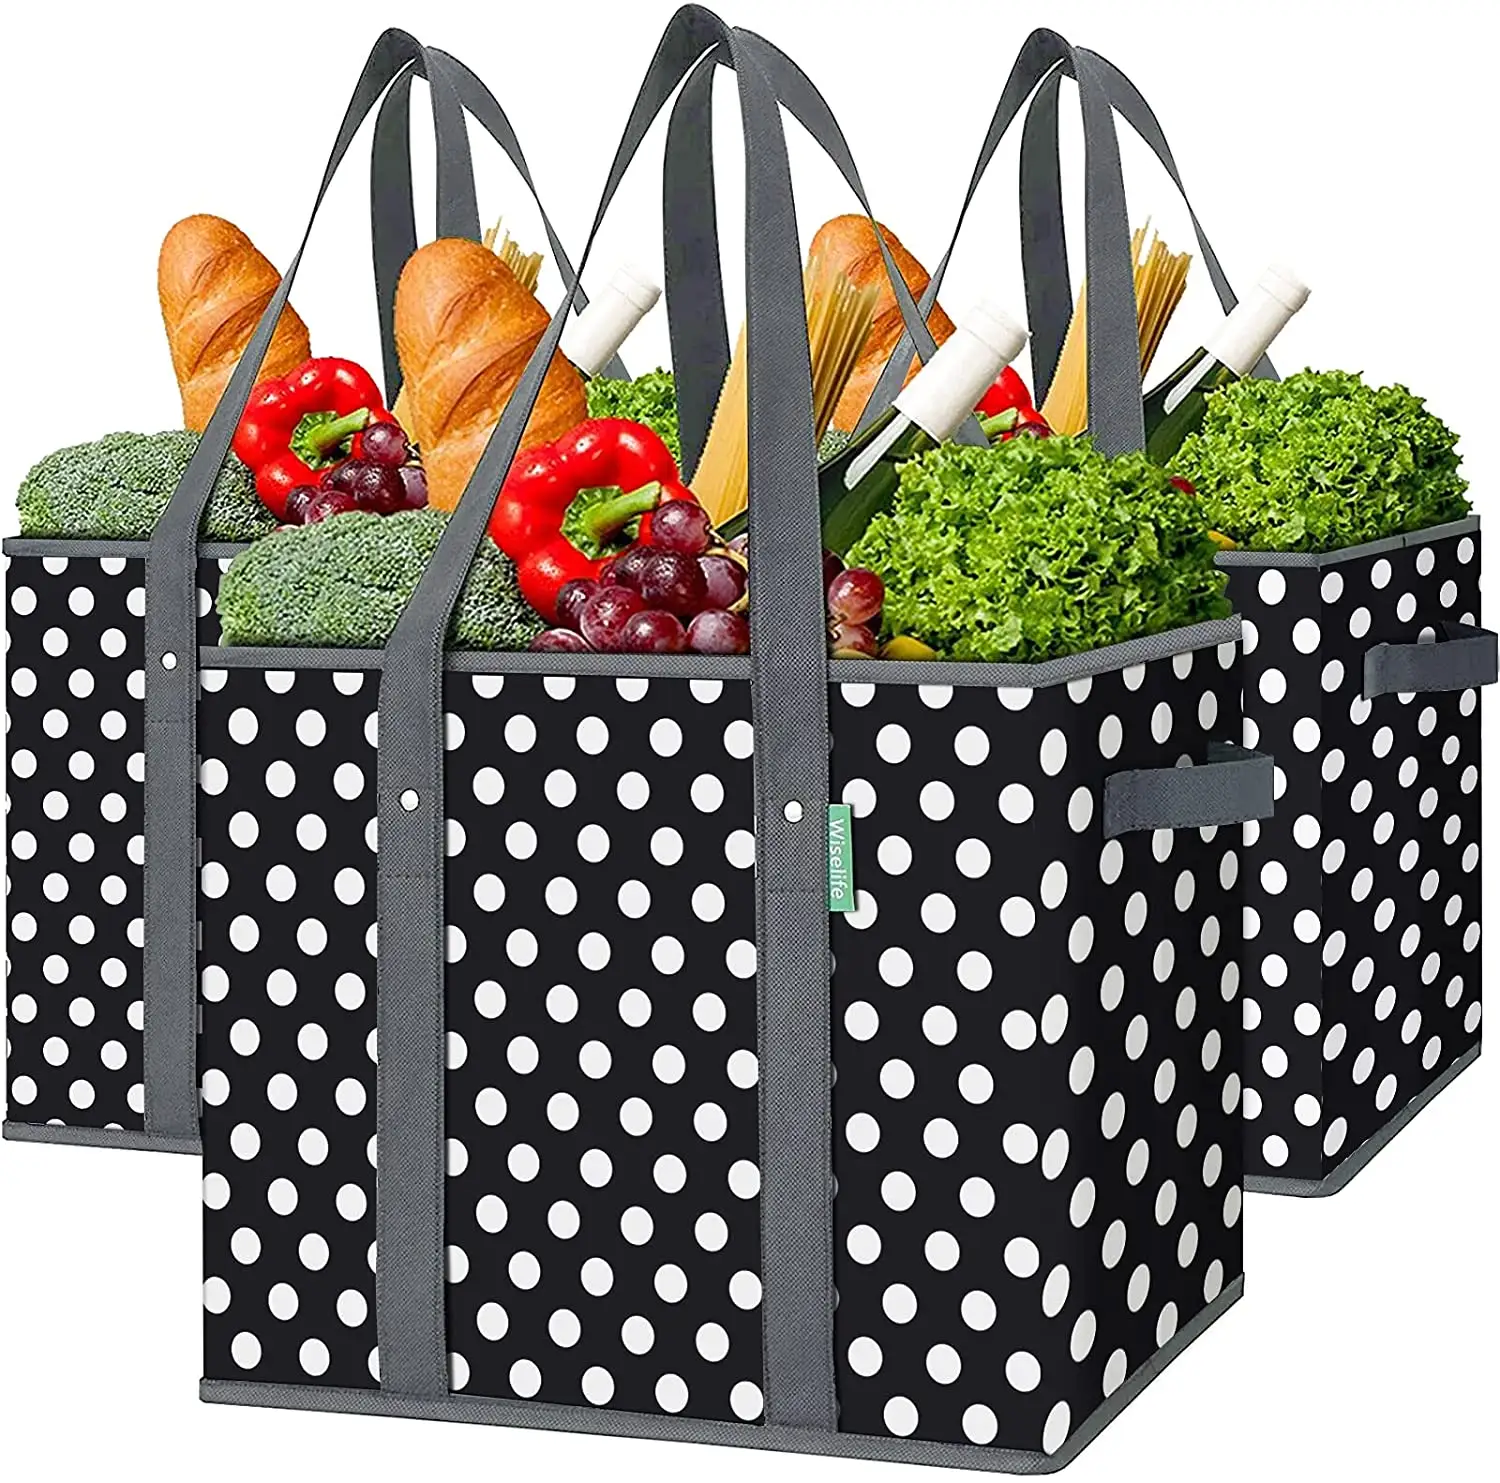 Wholesale Reusable Triple Layer Structure Grocery Tote Bag Shopping Container Picnic Basket with Reinforced Sturdy Long Handle